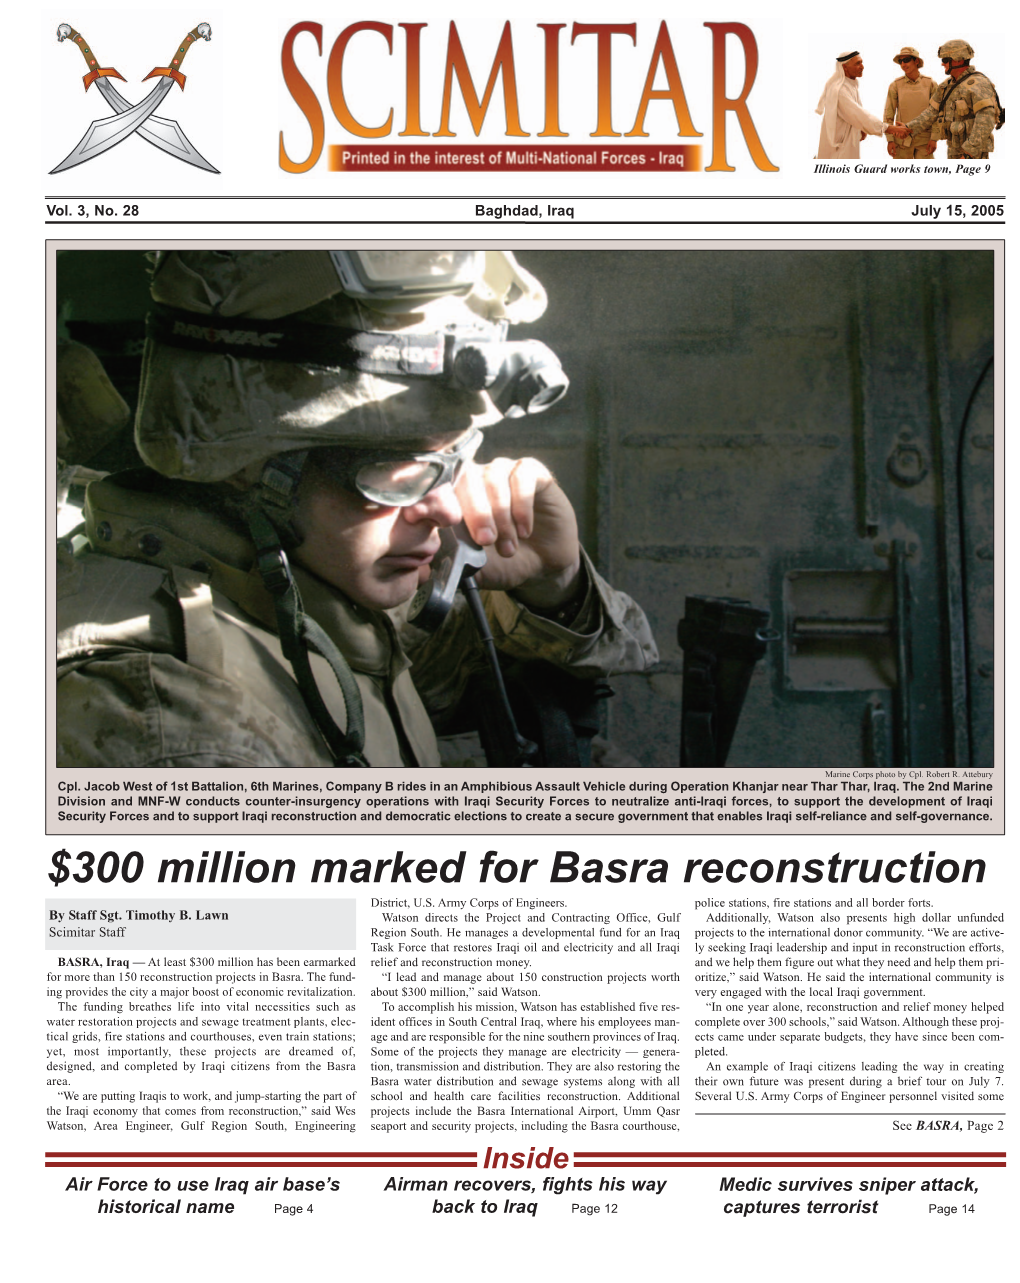 300 Million Marked for Basra Reconstruction District, U.S